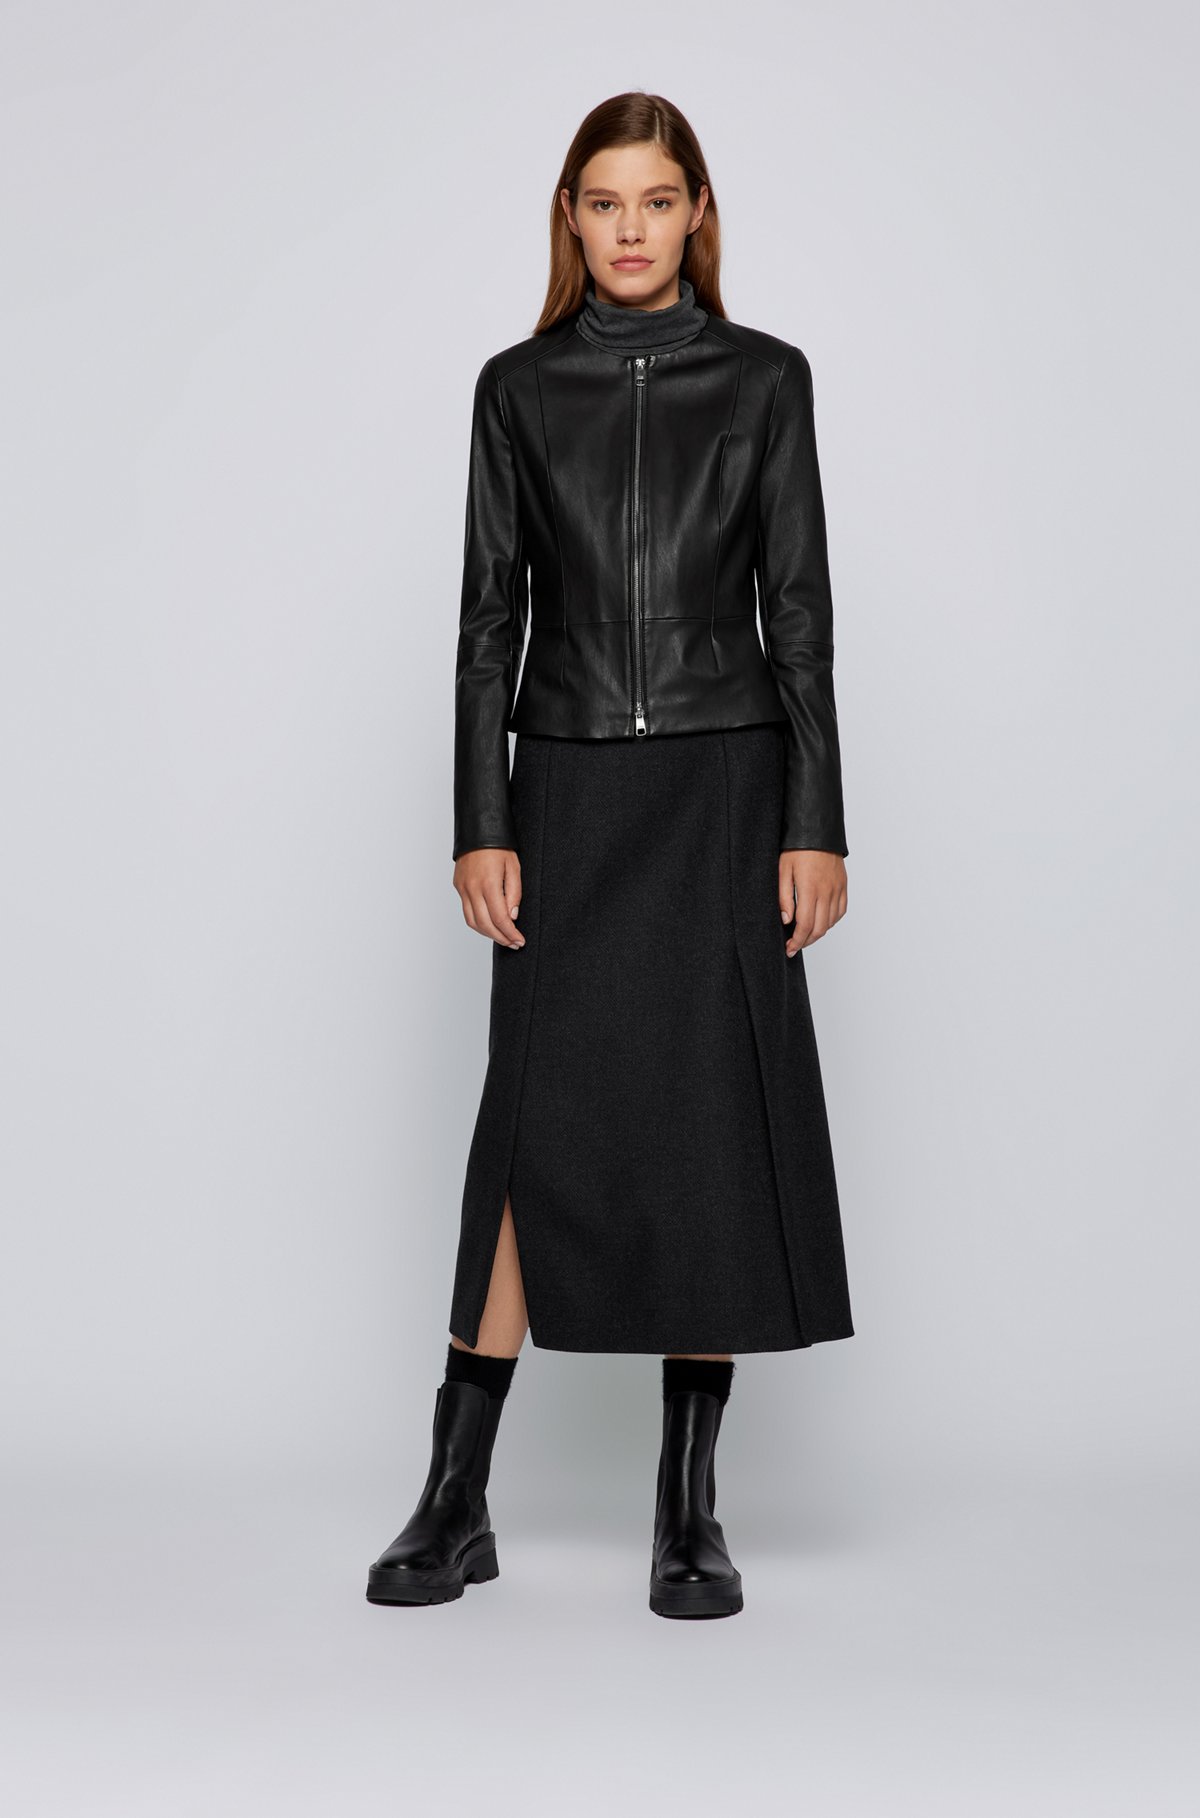 Slim-fit collarless jacket in stretch leather, Black